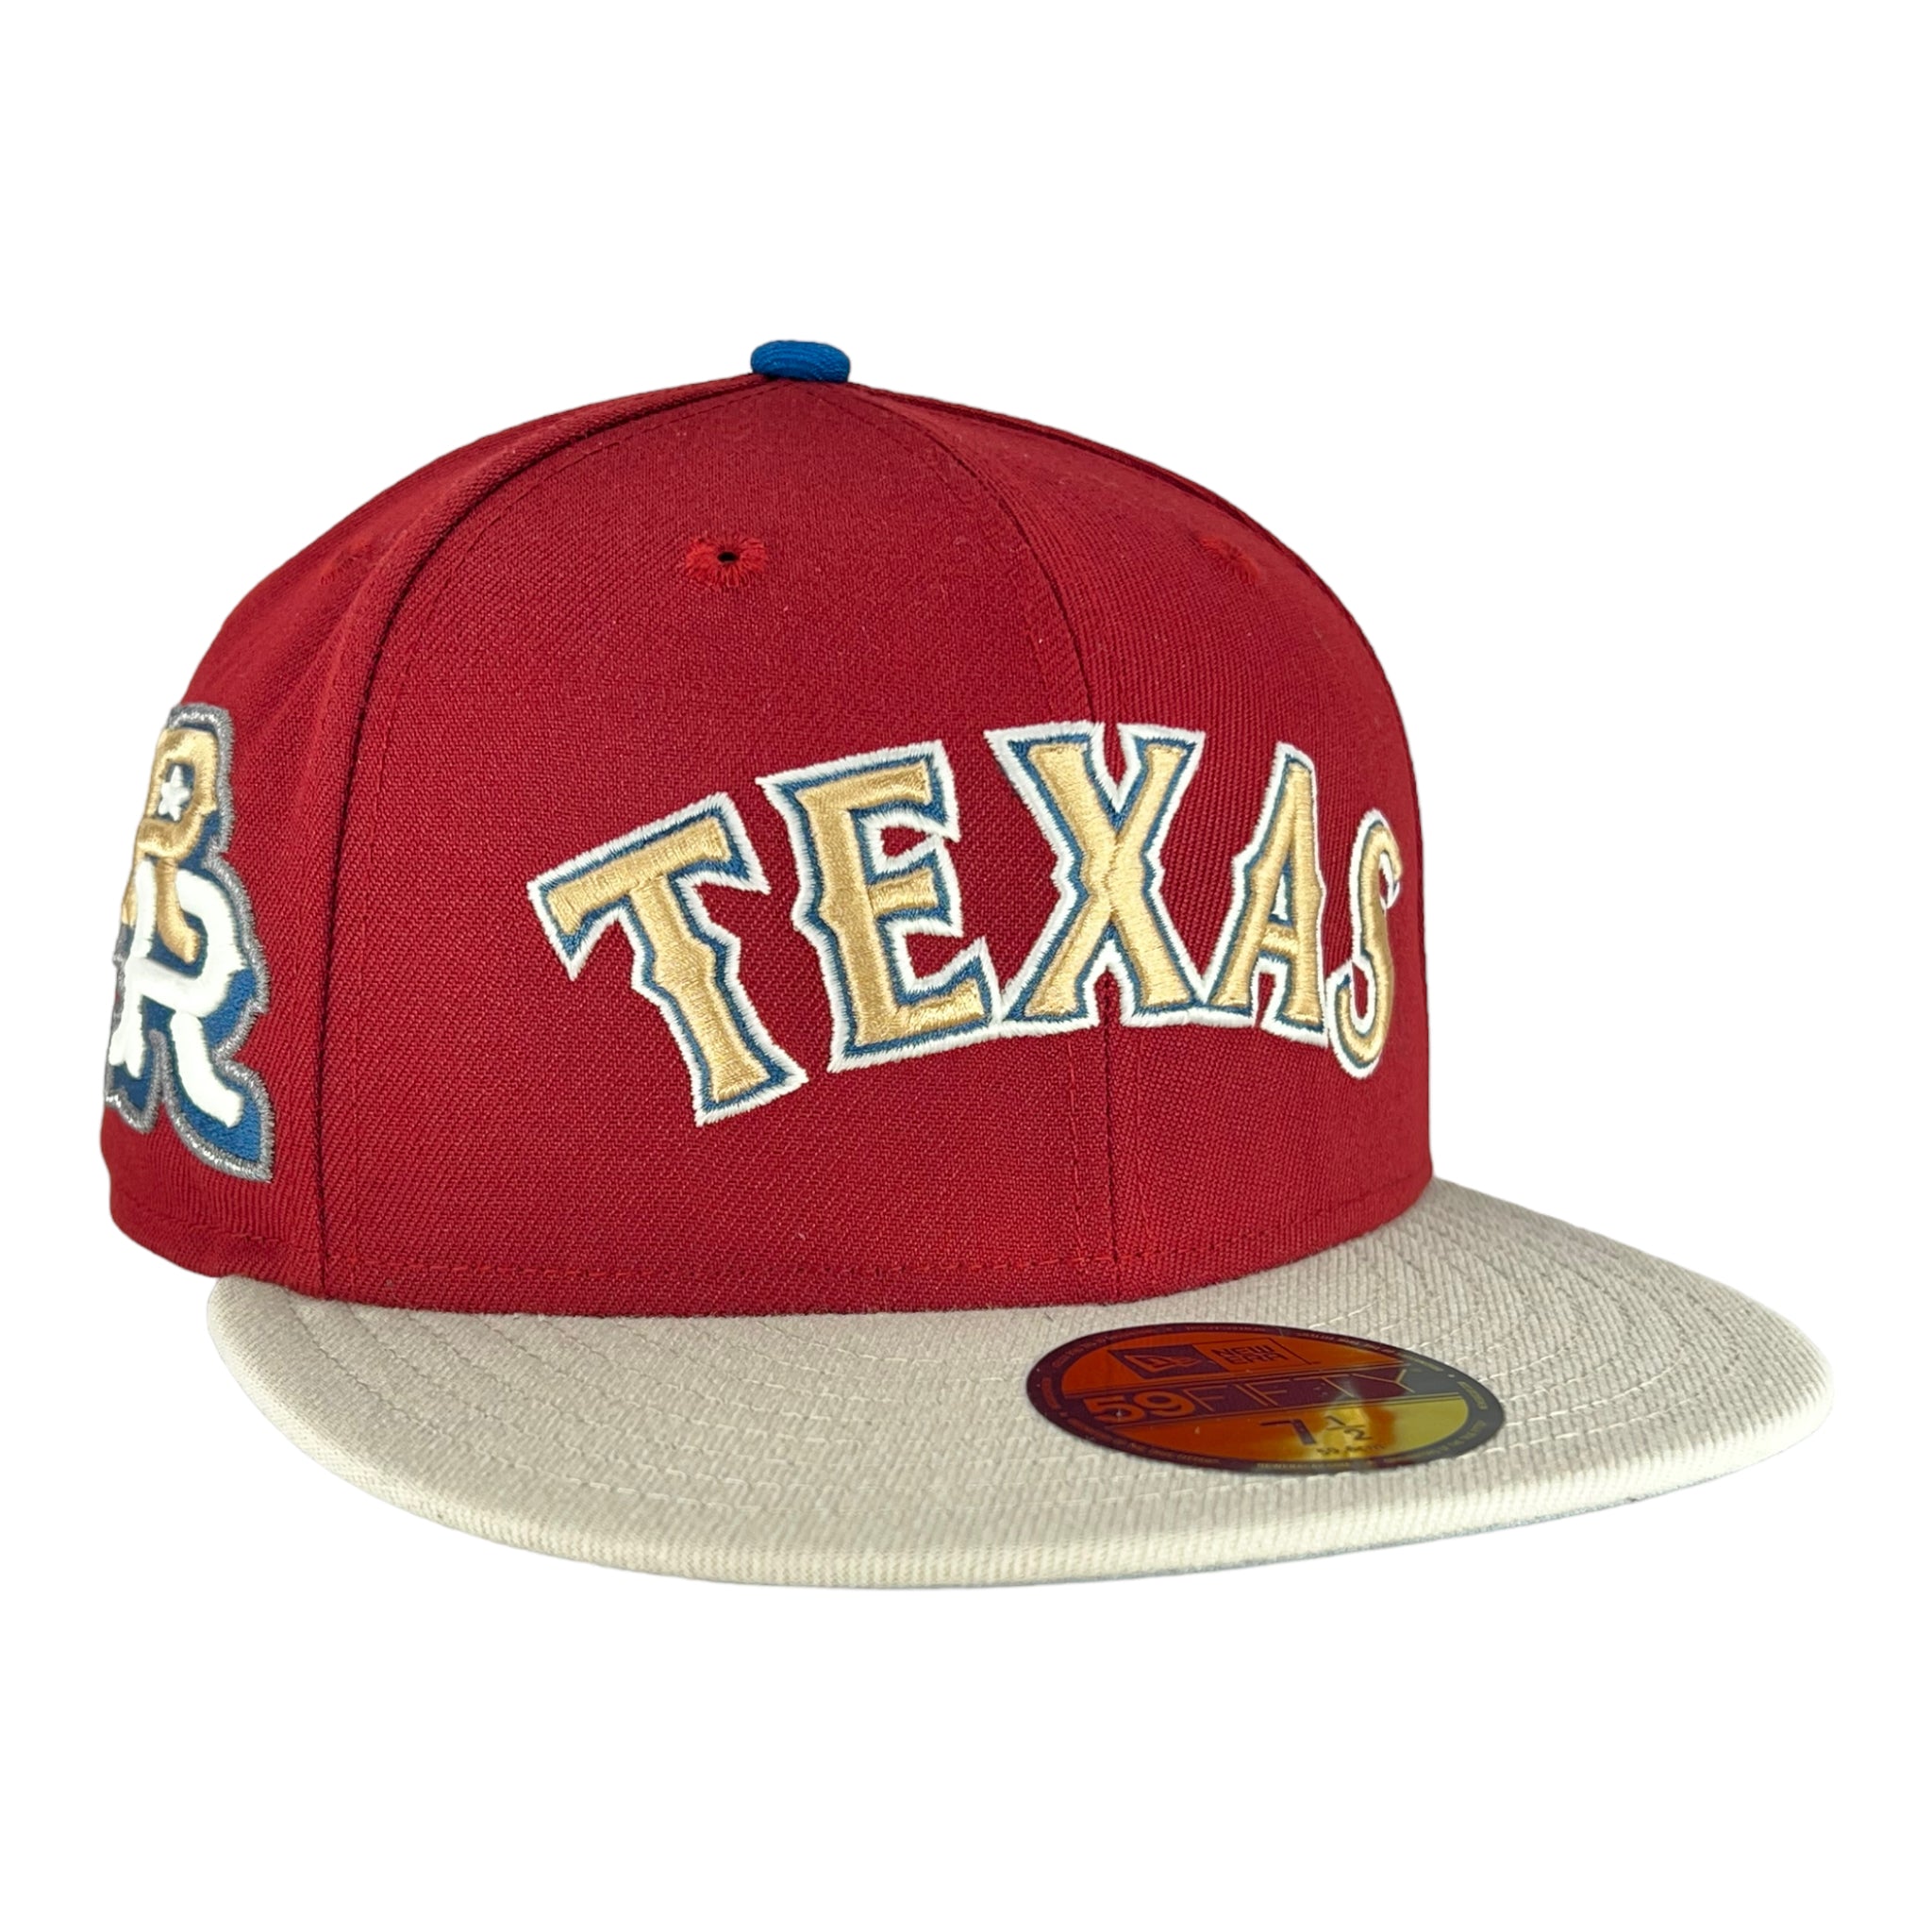 Lids Texas Rangers New Era Retro 59FIFTY Fitted Hat - Stone/Navy